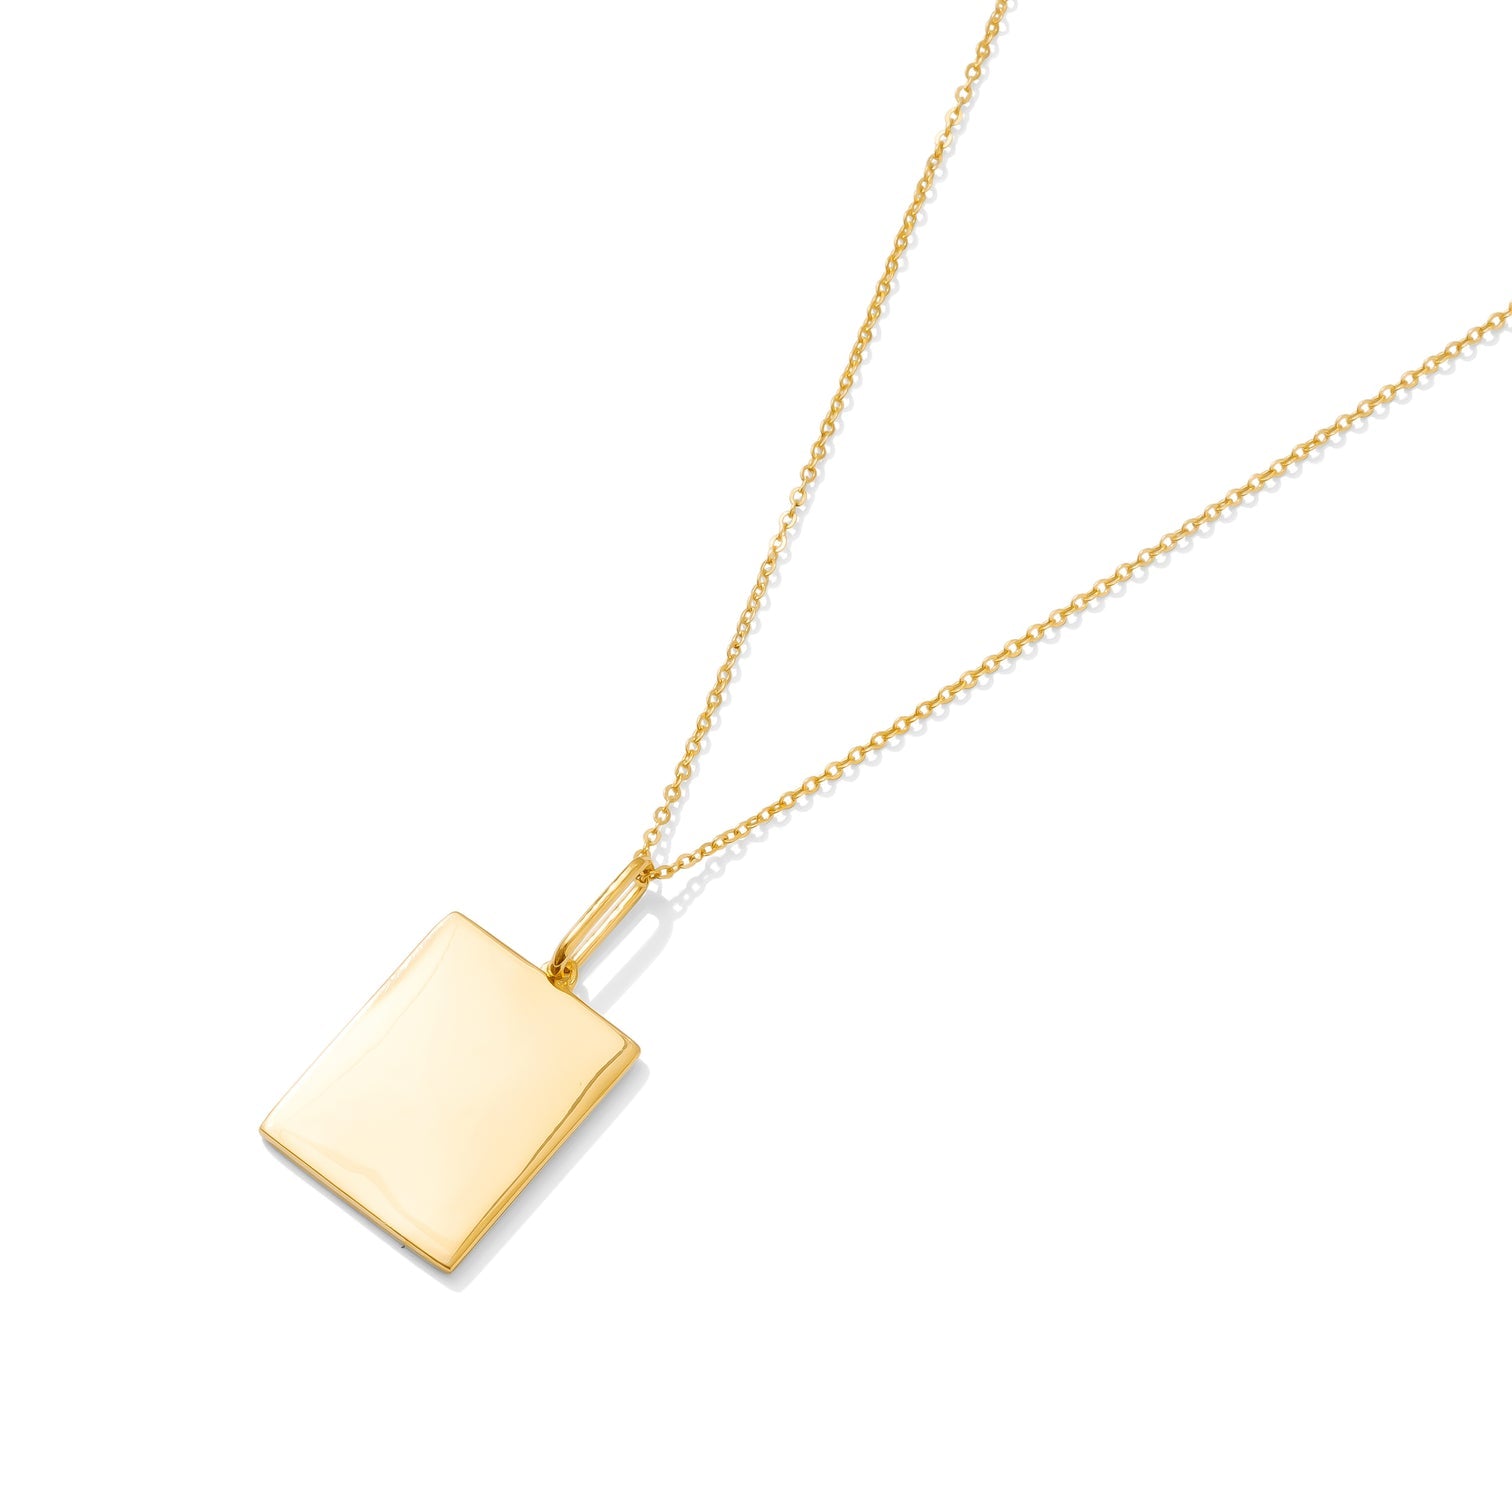 Trevi Necklace - 14k gold plated